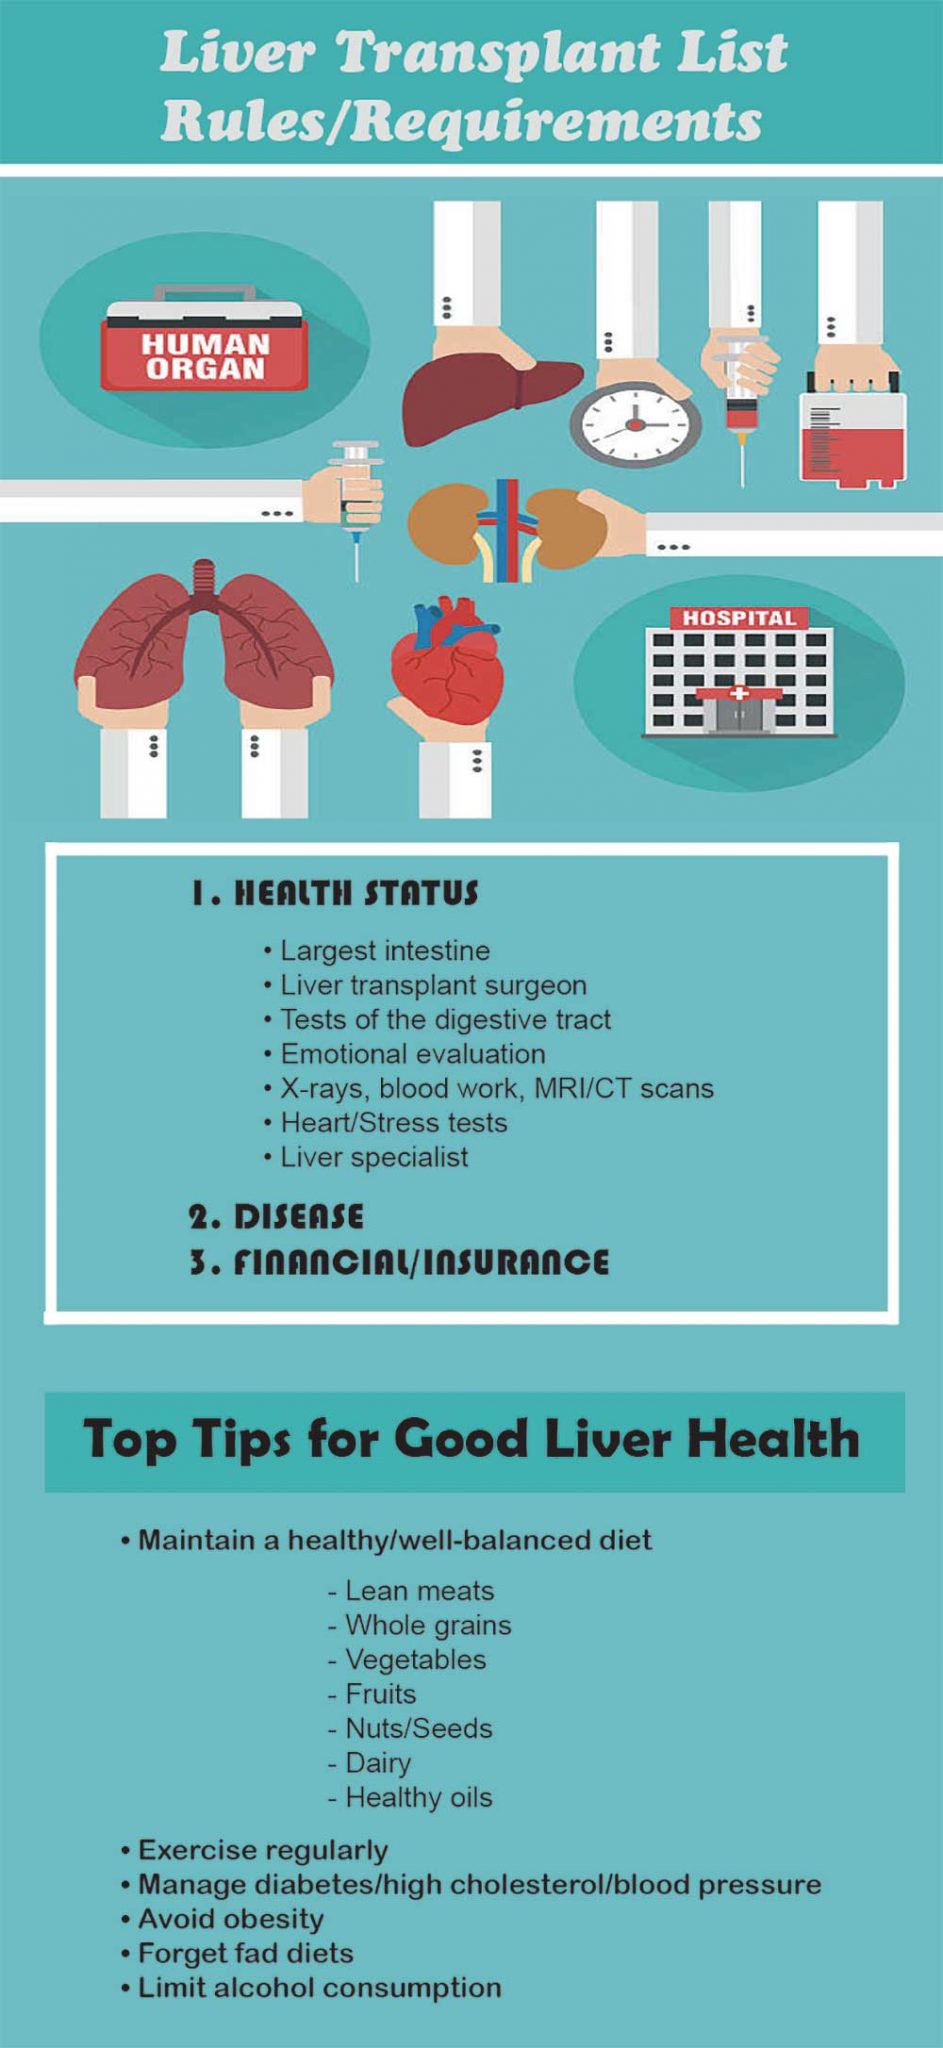 Liver Transplant List of Rules and Requirements Fatty Liver Disease